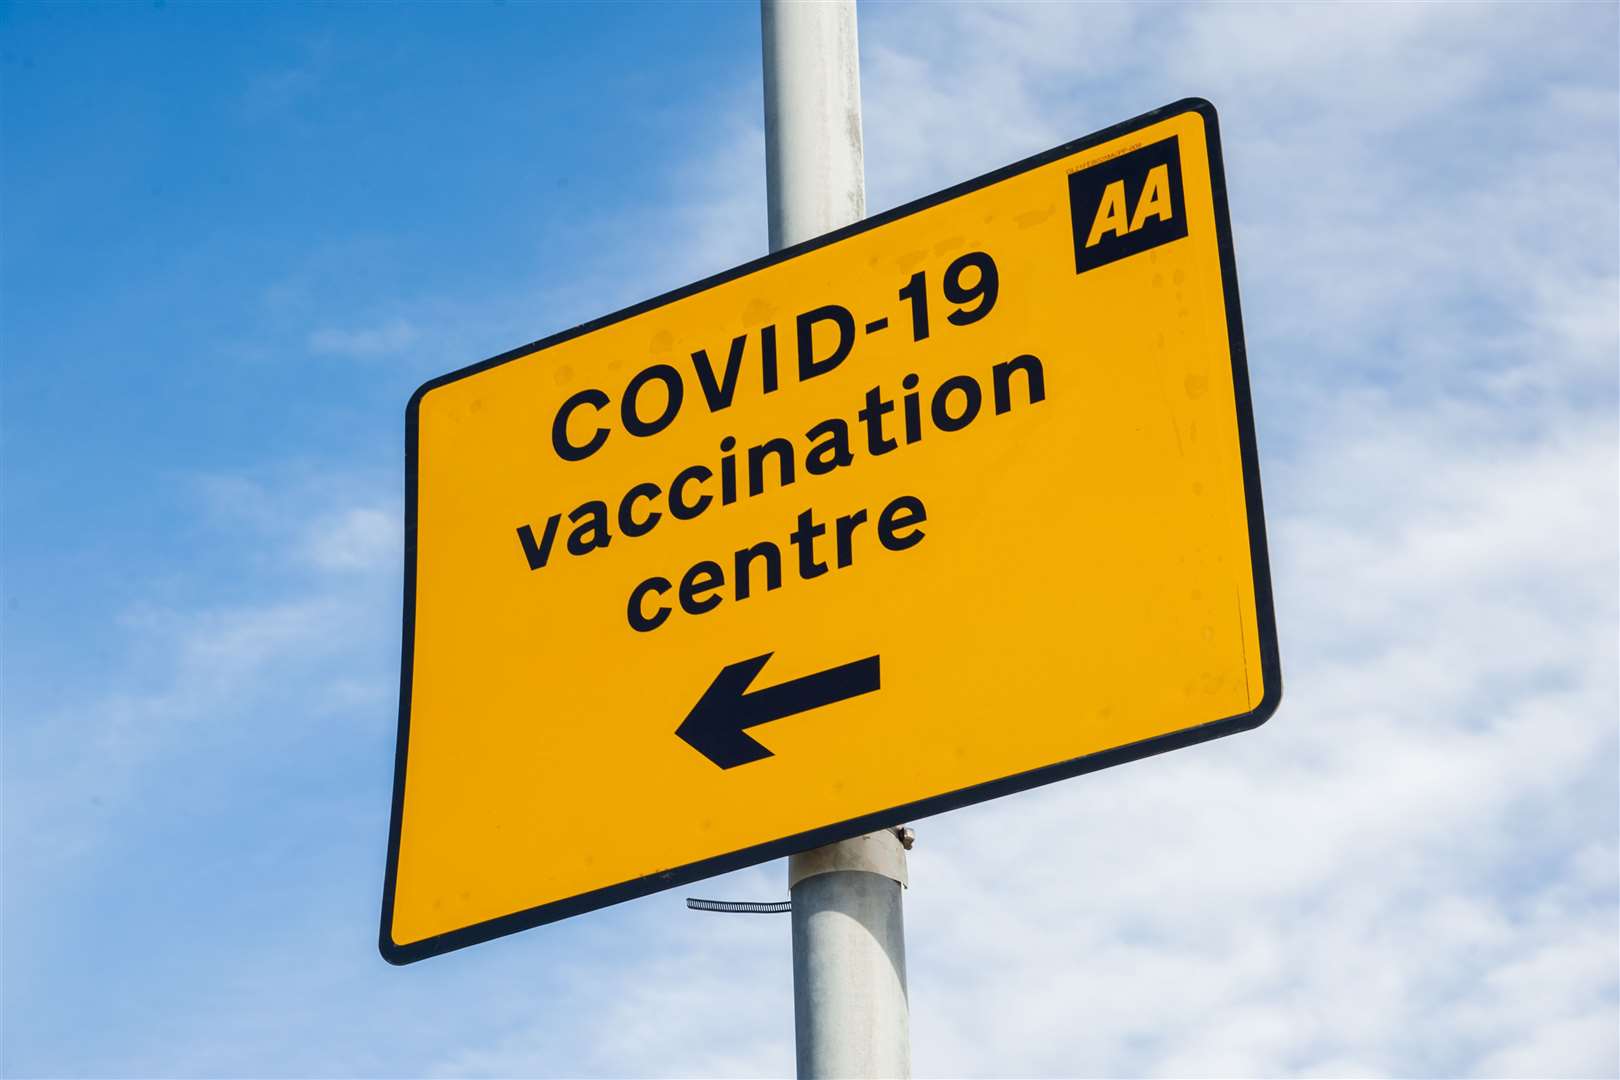 NHS vaccinations will start for Level 6 patients.